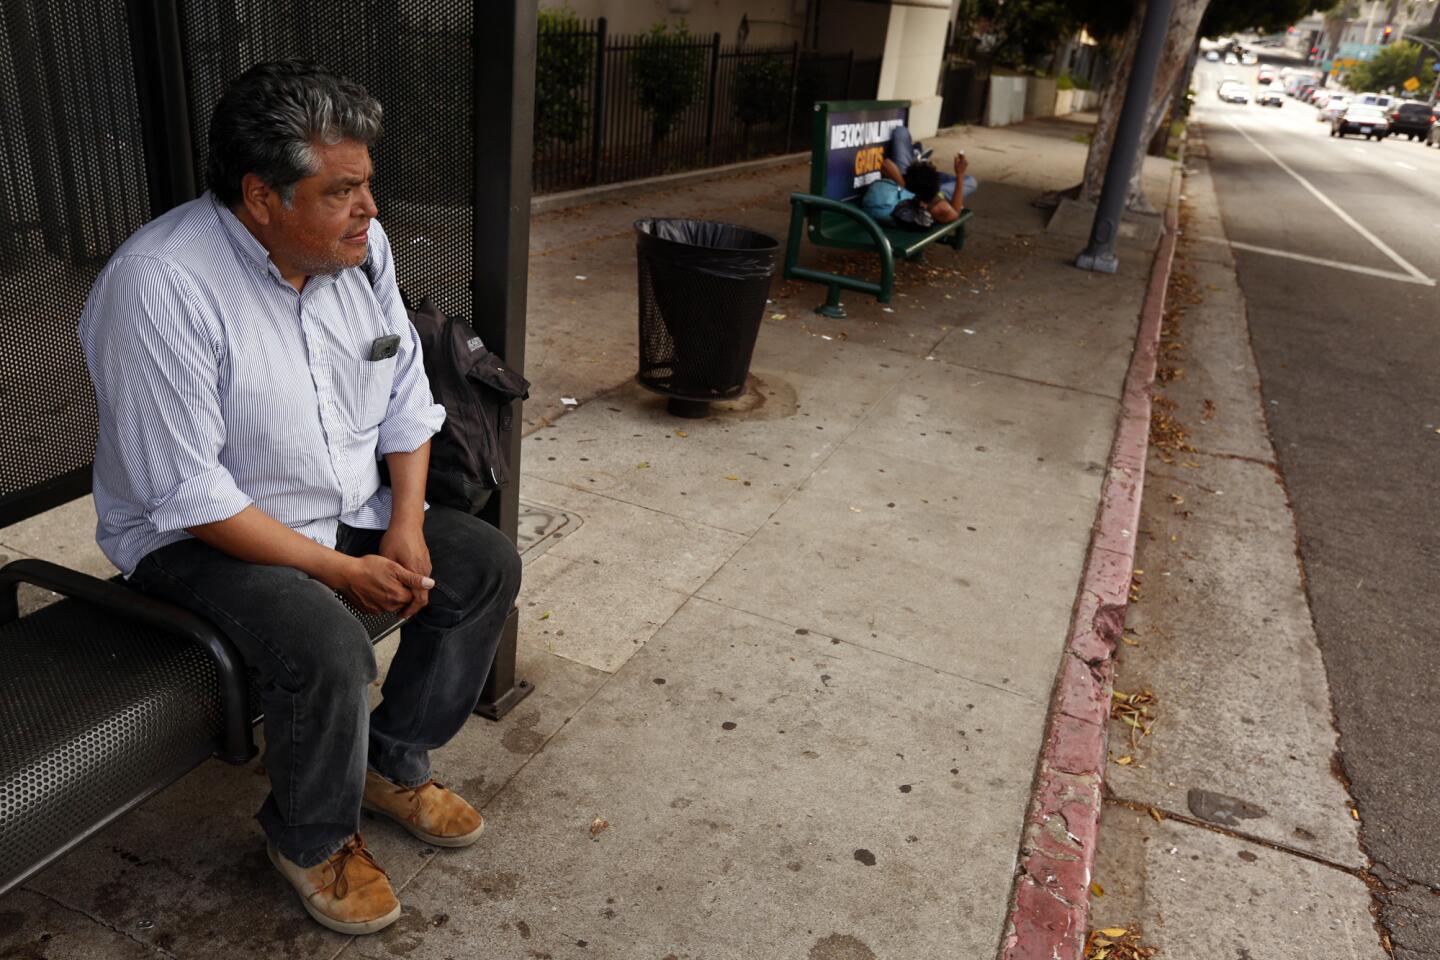 Surge in Latino homeless population